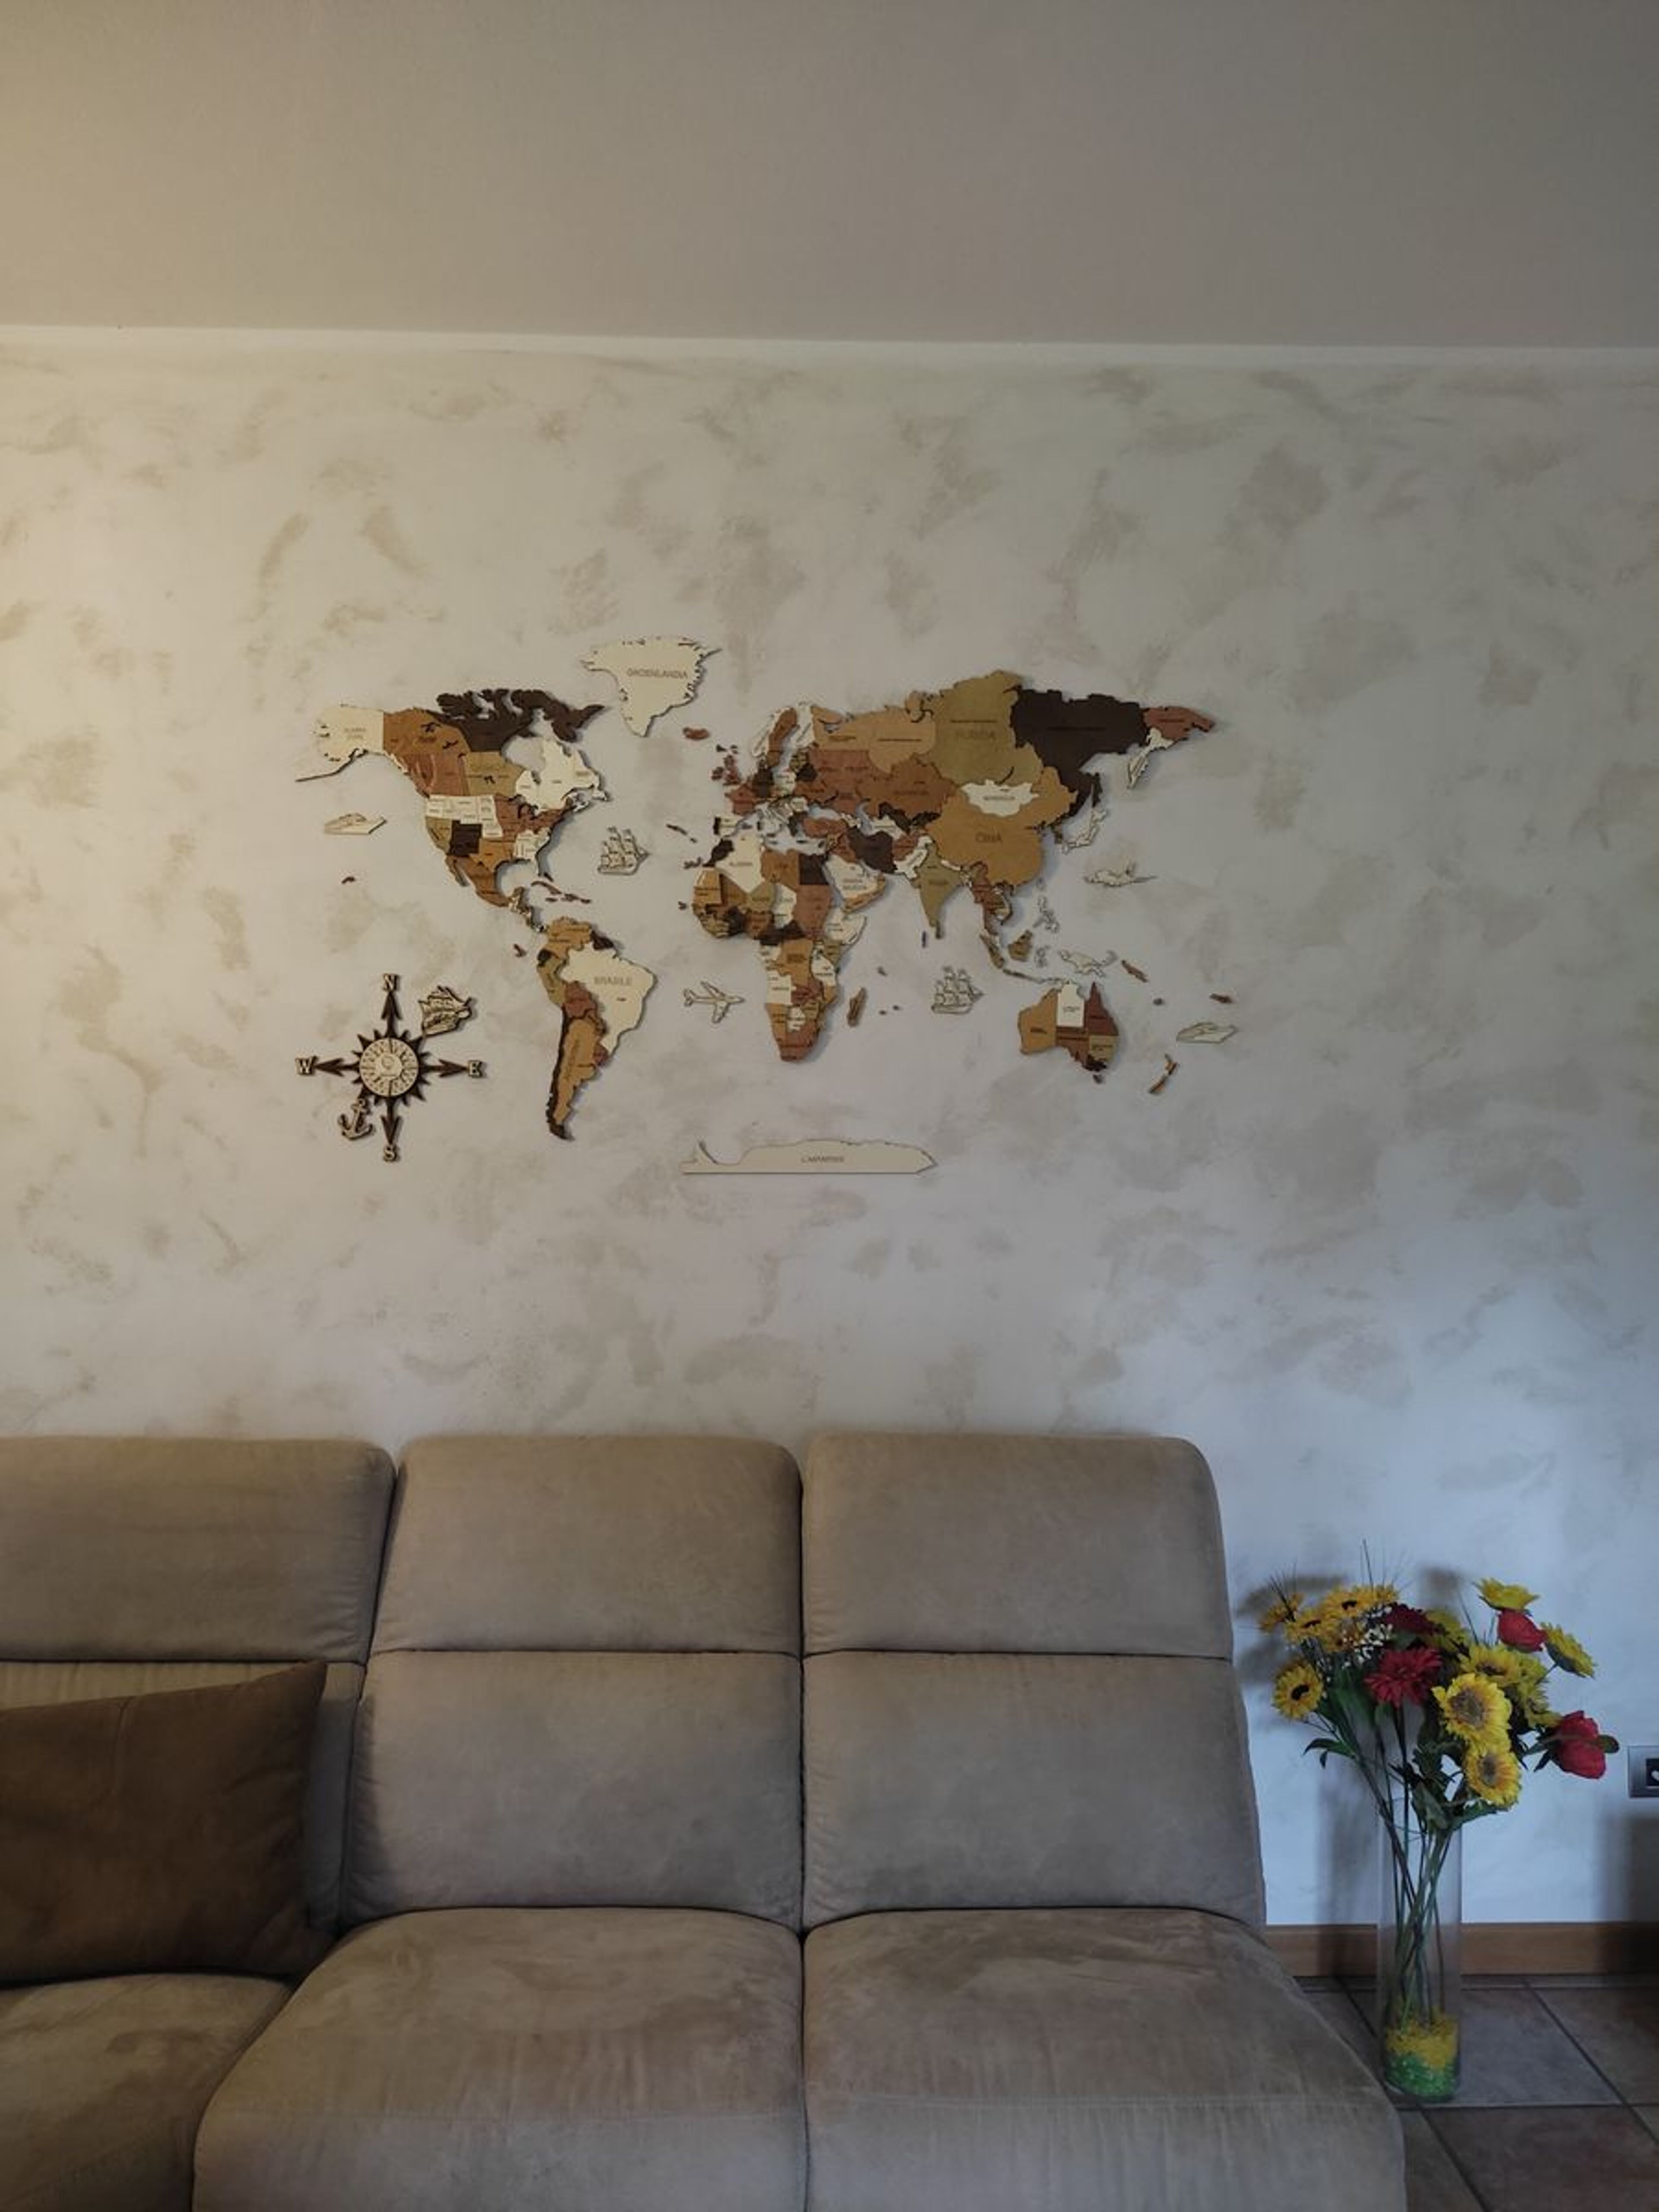 Review for Wooden World Map Wall Decoration - image from Ivano P.